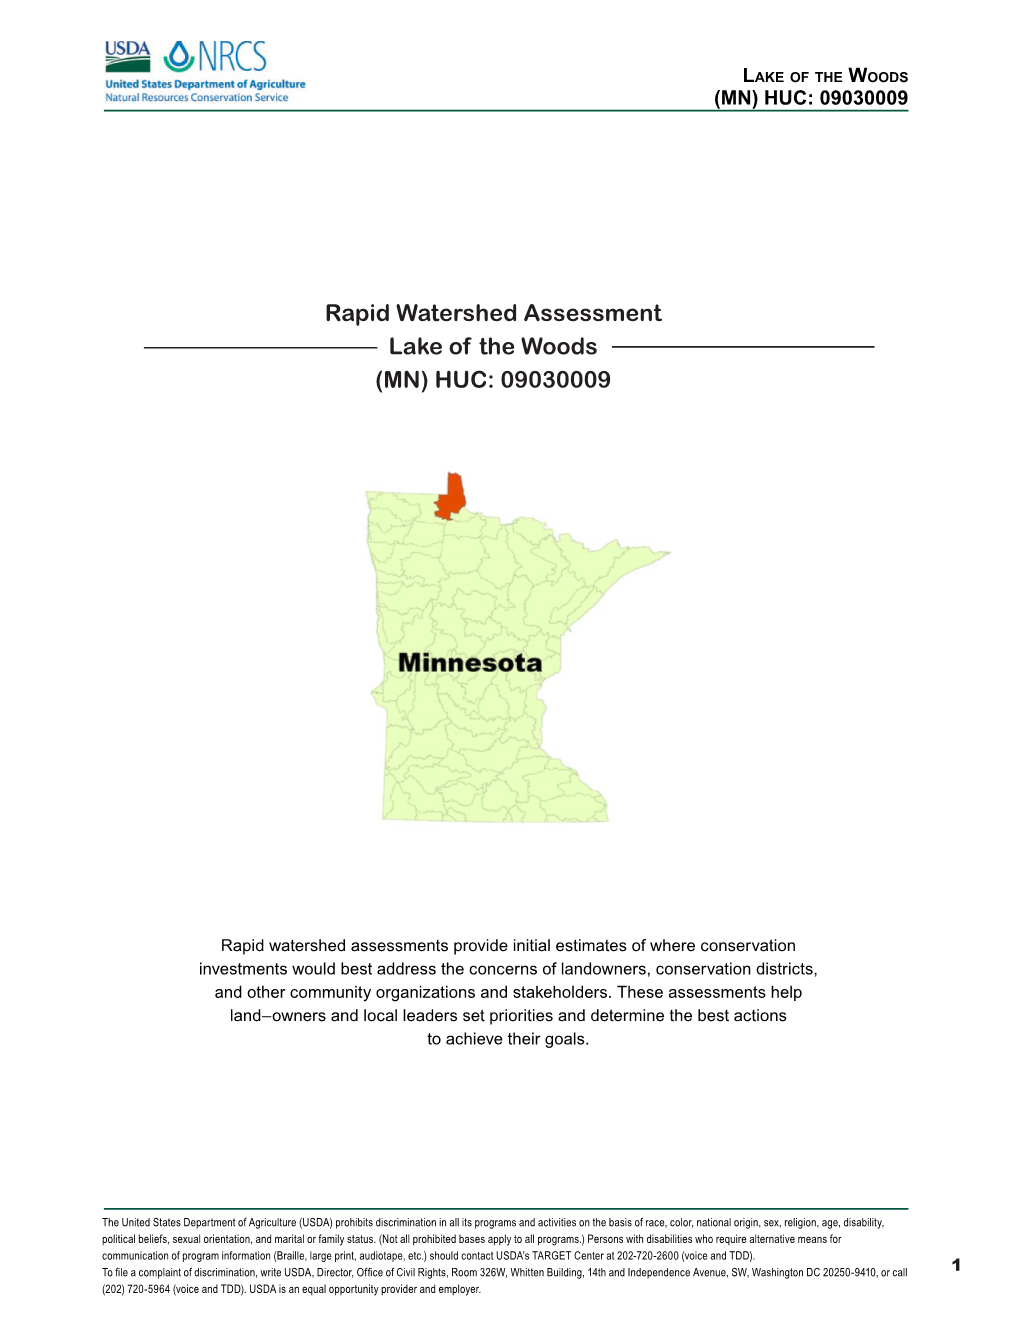 Rapid Watershed Assessment Lake of the Woods (MN) HUC: 09030009